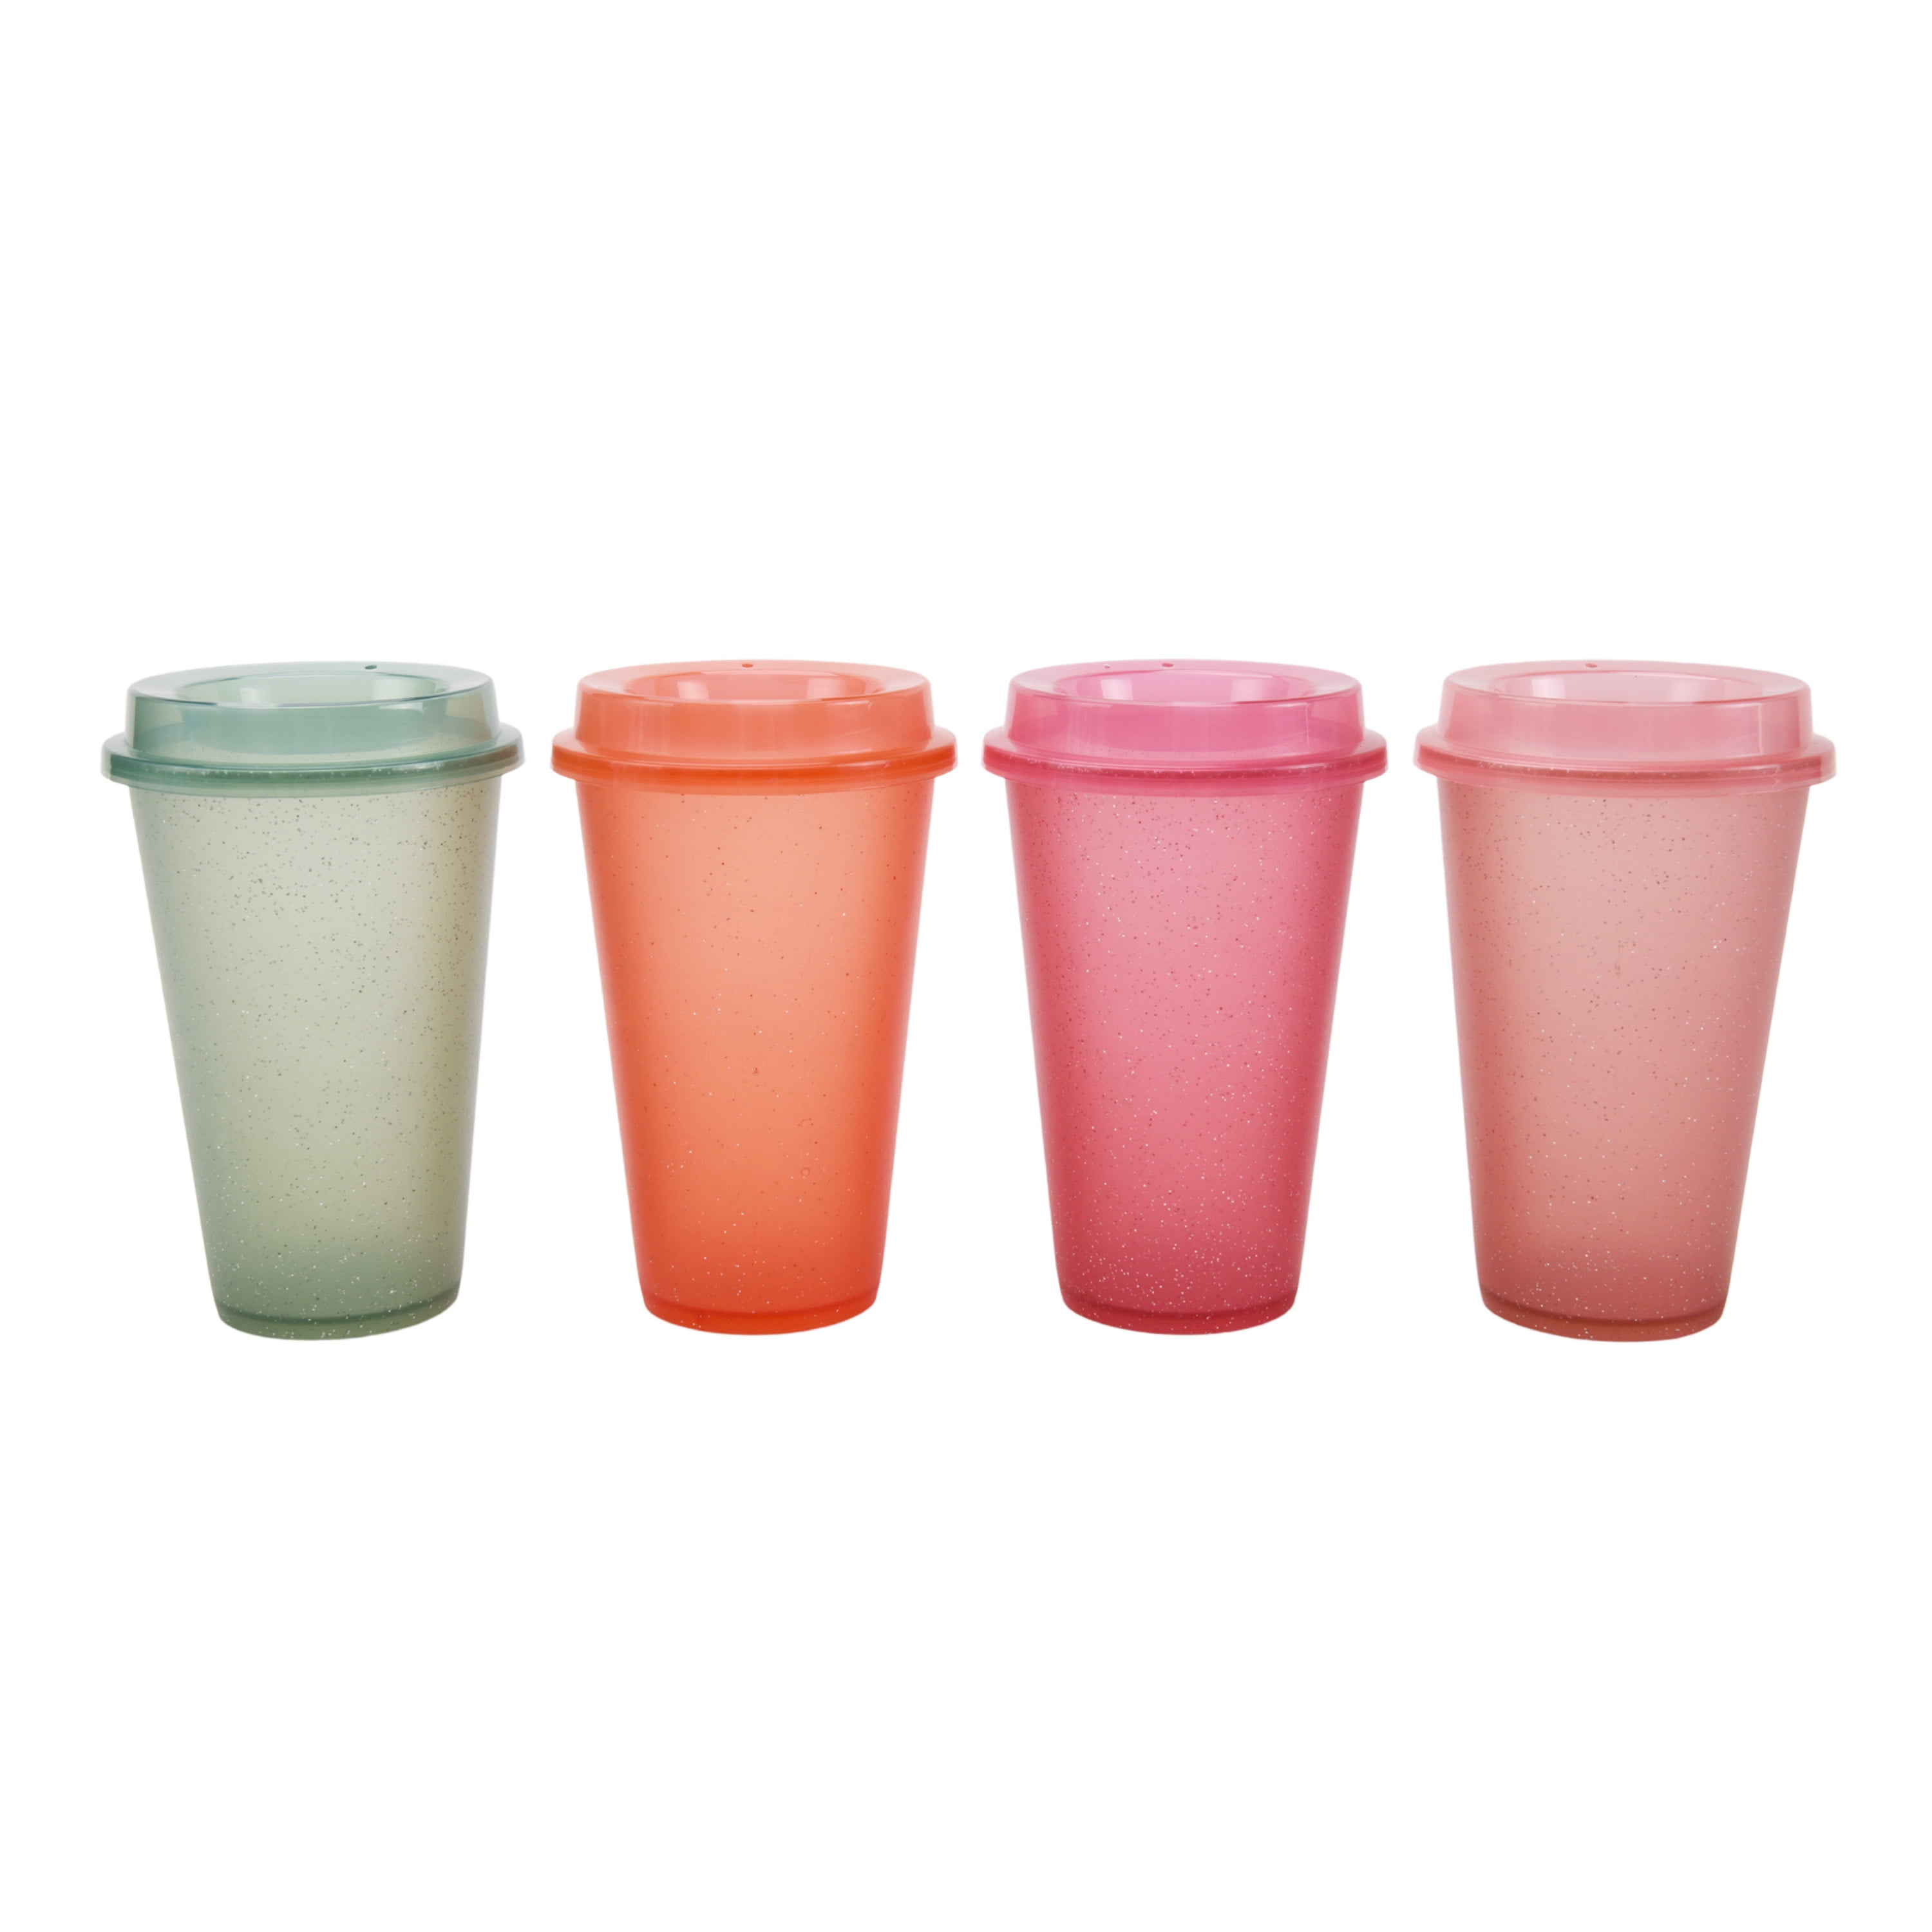 Set of 4 Bright Coloured Tumblers Stacking Mugs